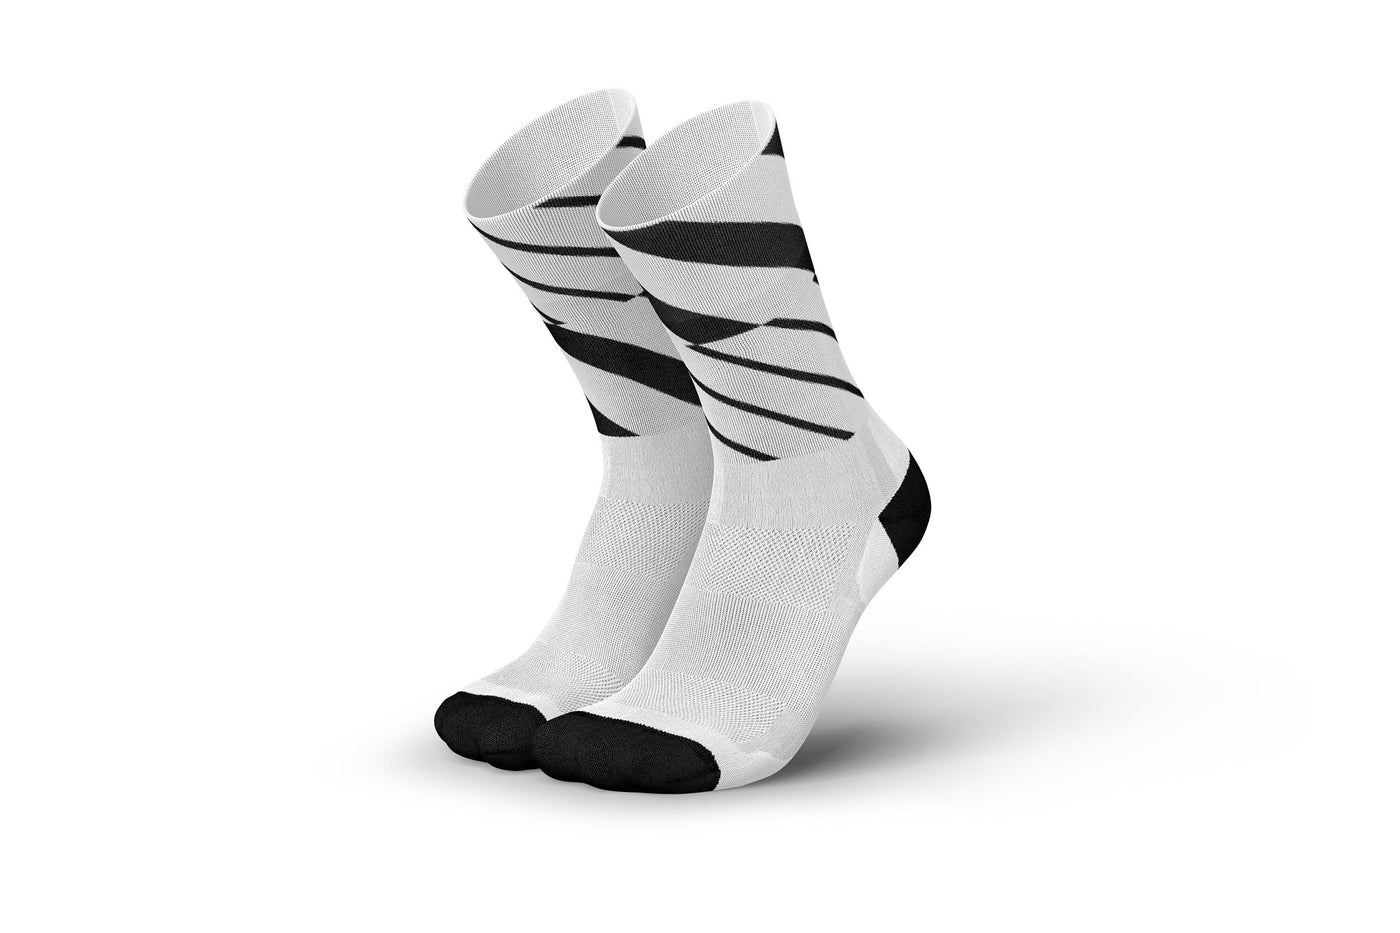 Incylence Ultralight Angles White Socks (chaussettes blanches ultralégères)